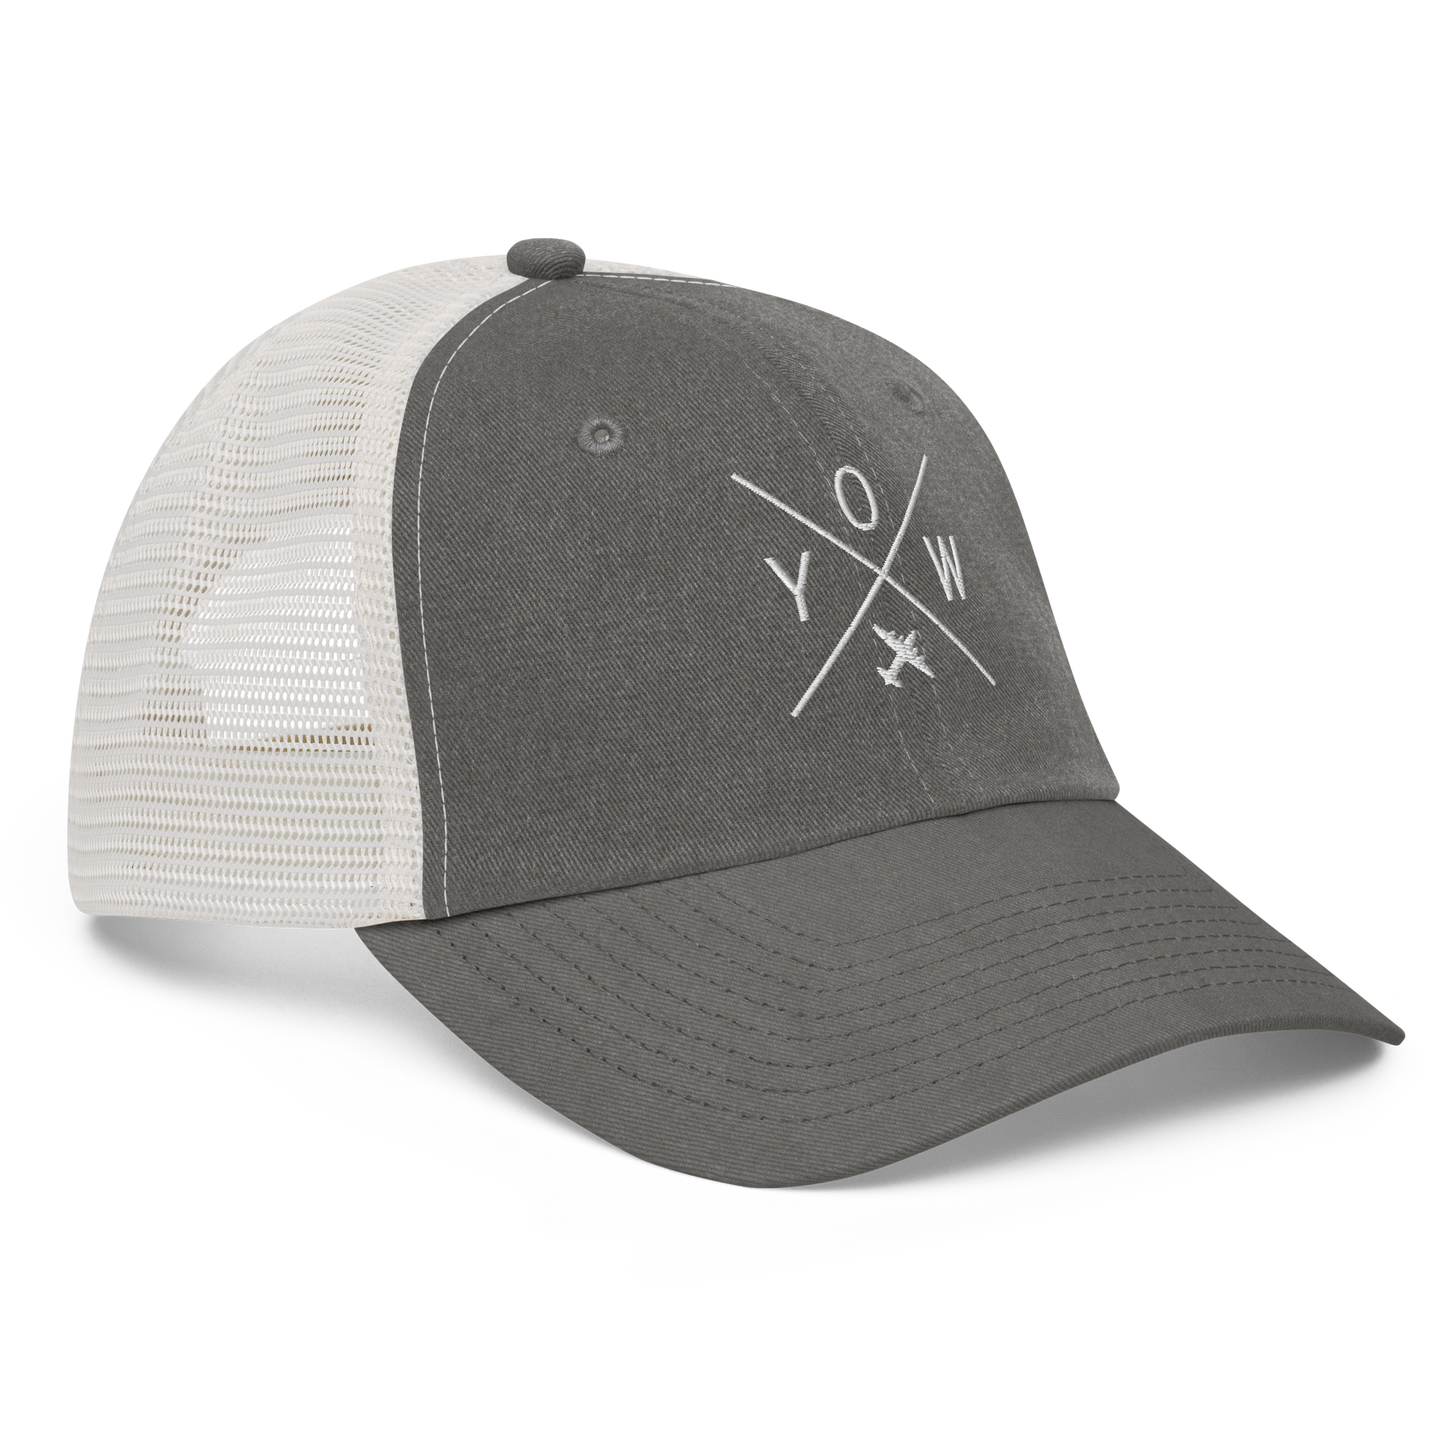 YHM Designs - YOW Ottawa Pigment-Dyed Trucker Cap - Crossed-X Design with Airport Code and Vintage Propliner - White Embroidery - Image 10